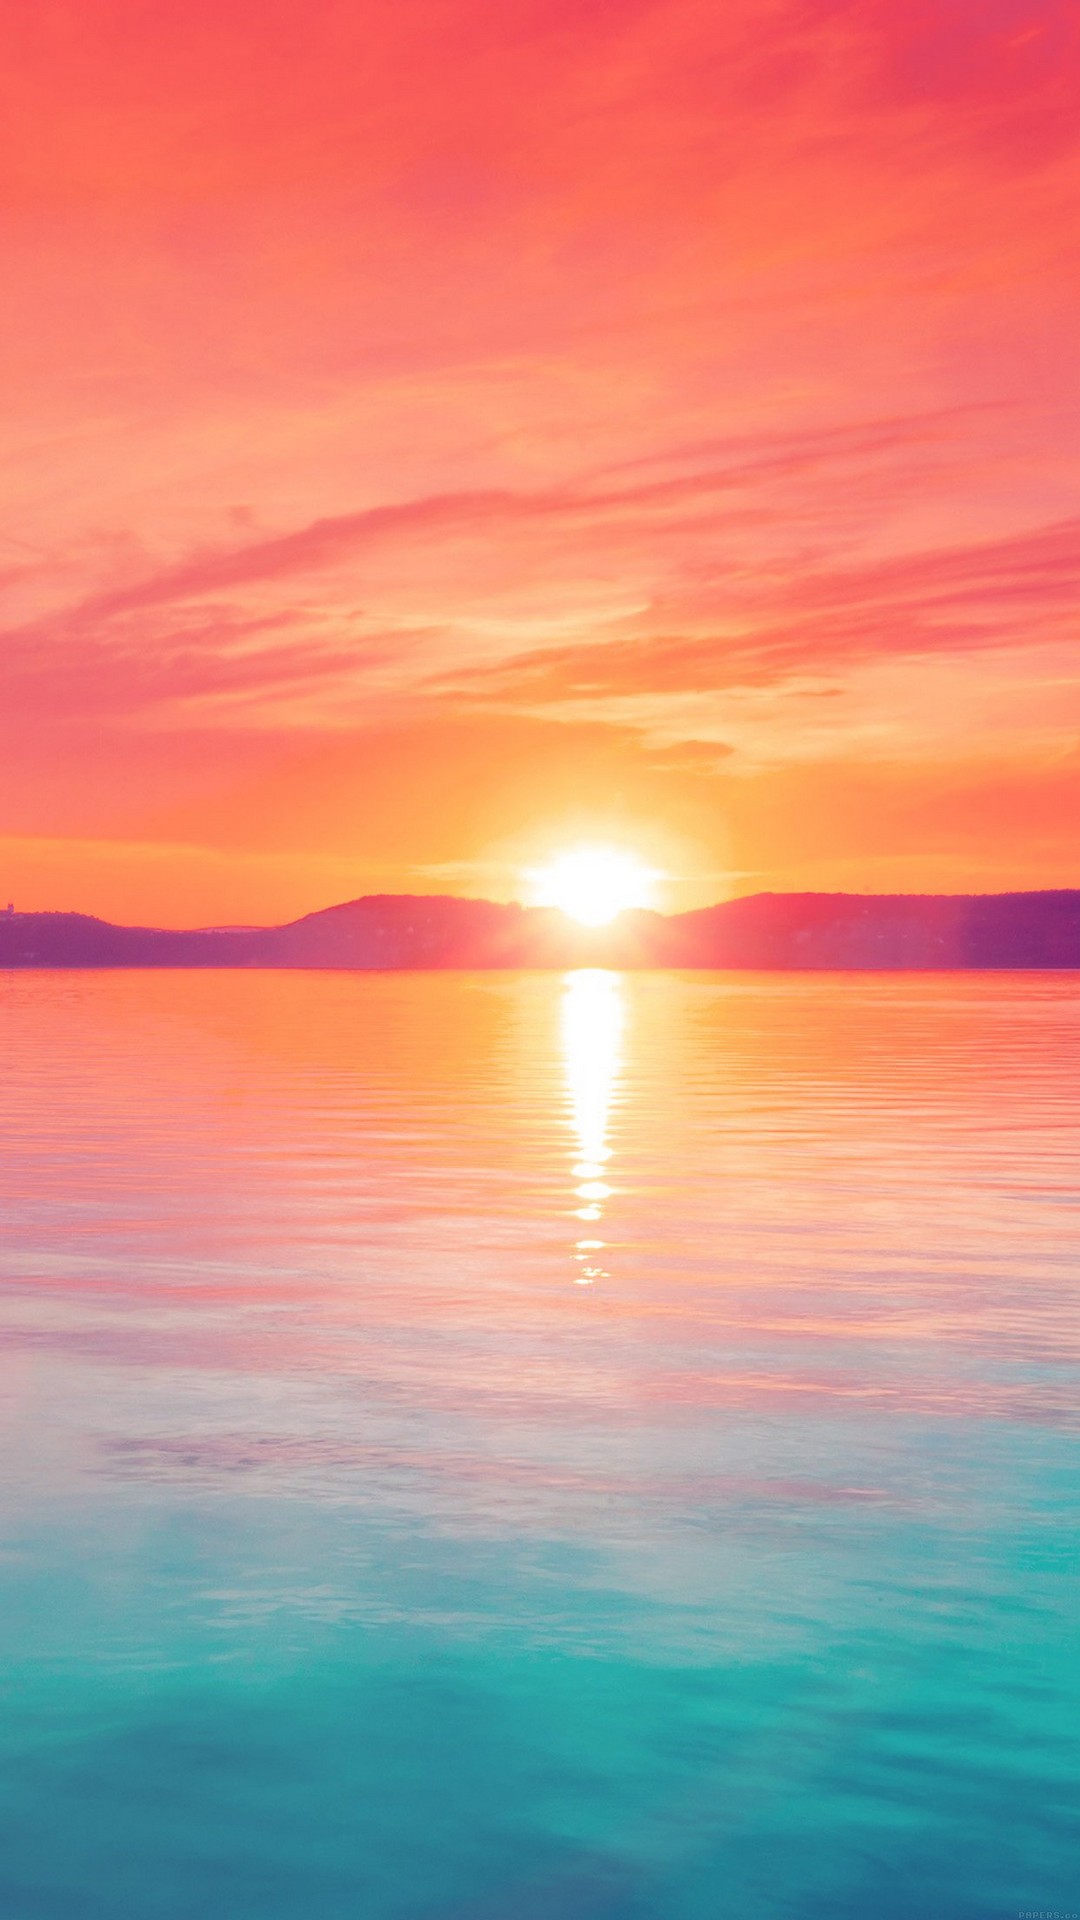 Sunset iPhone X Wallpaper HD with high-resolution 1080x1920 pixel. Download all Mobile Wallpapers and Use them as wallpapers for your iPhone, Tablet, iPad, Android and other mobile devices